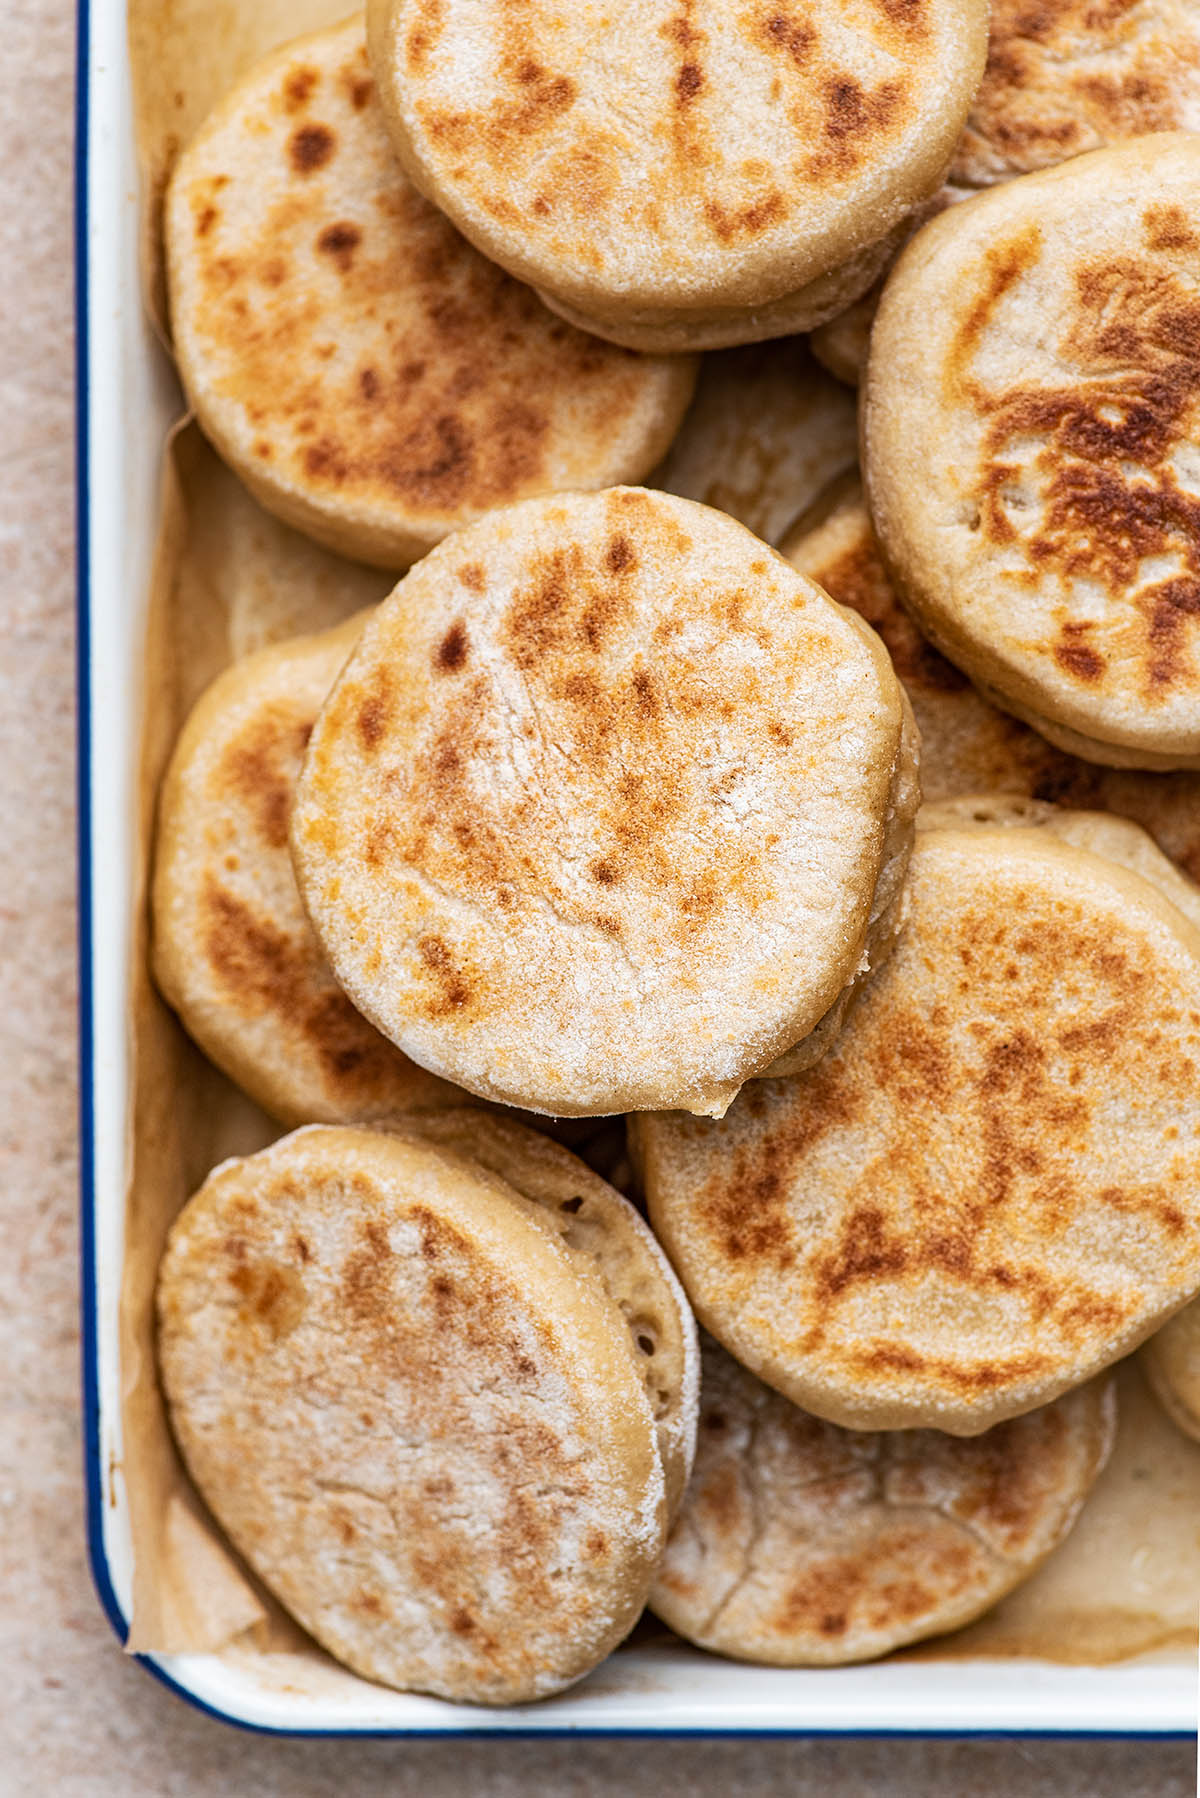 A pile of English muffins in a shallow tray.